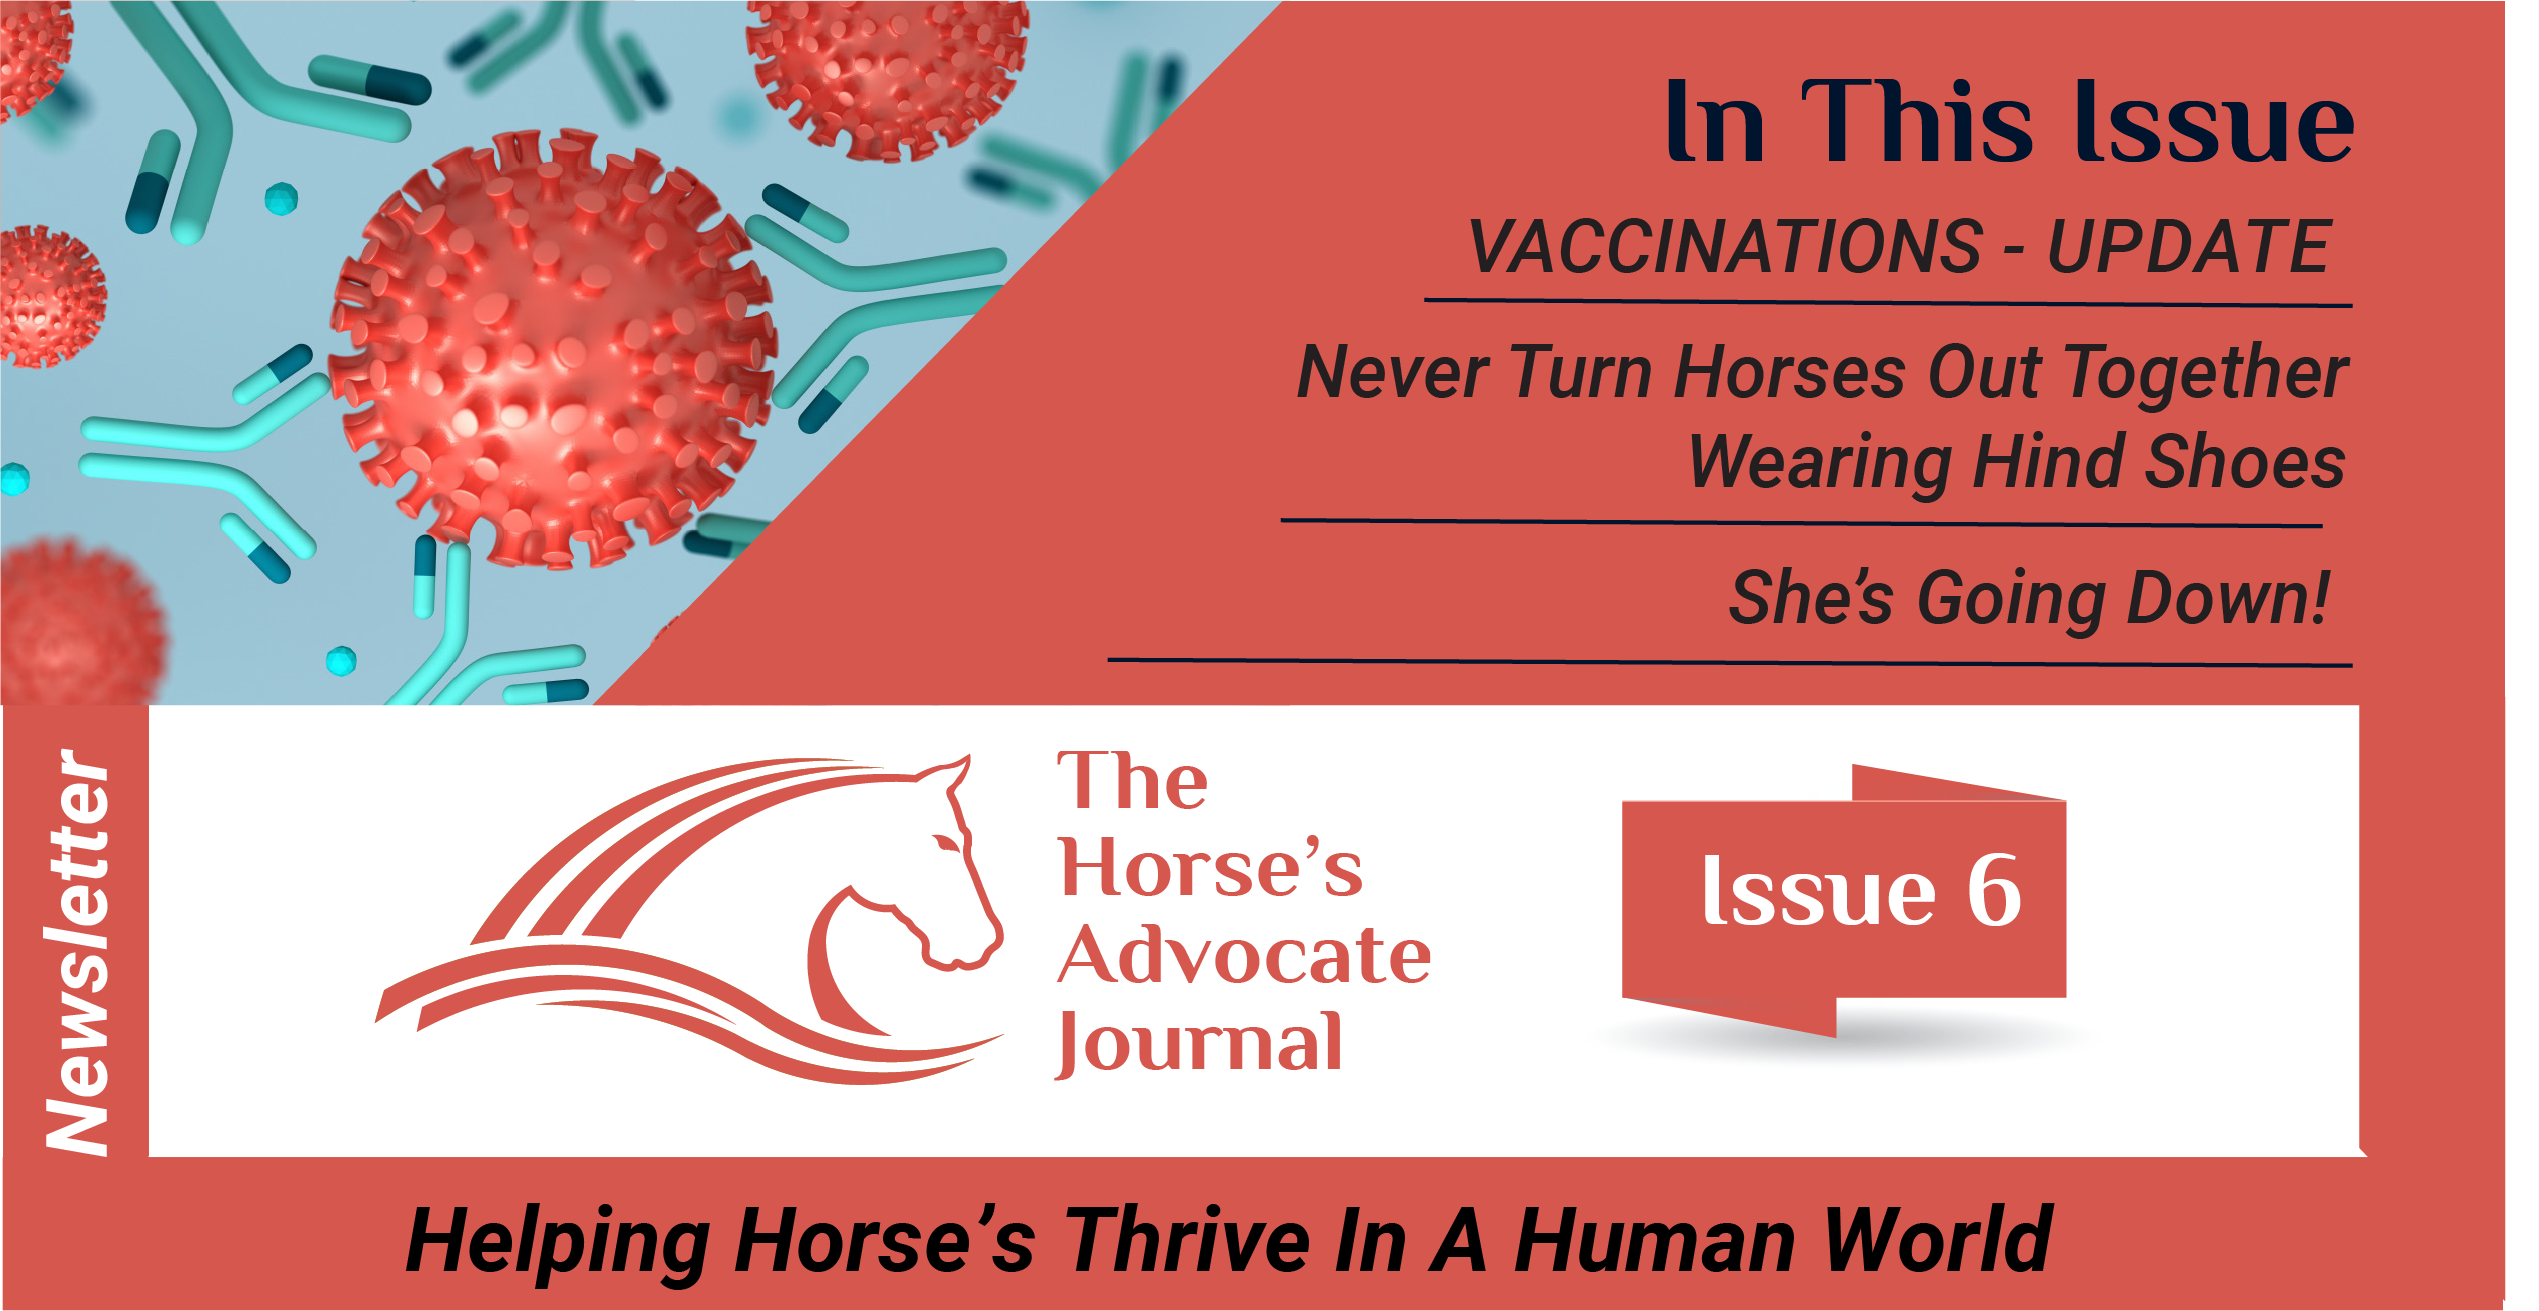 The Horses Advocate Journal Issue 6